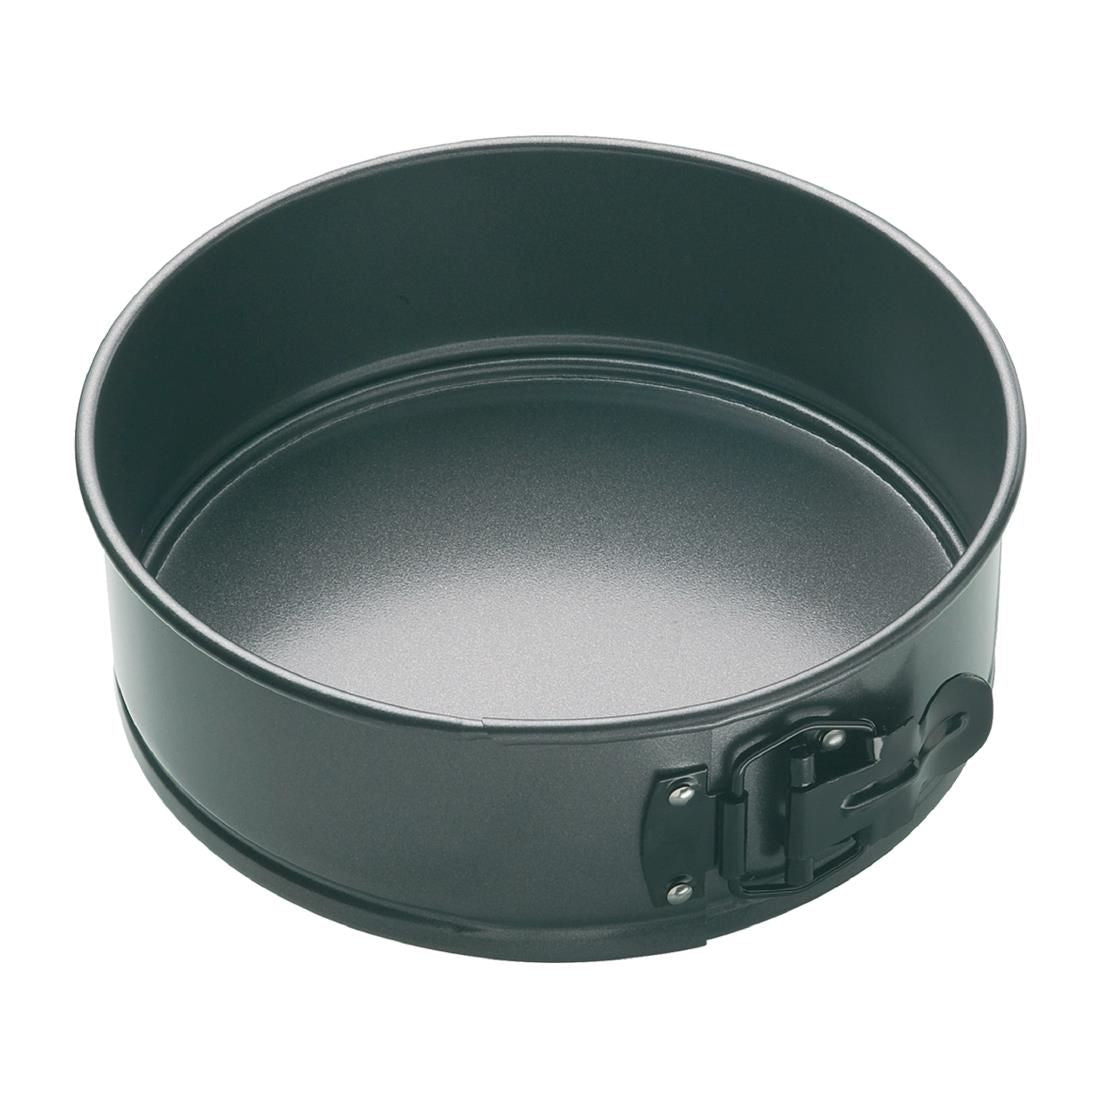 FC352 Masterclass Non-Stick Spring Form Round Cake Tin 180mm JD Catering Equipment Solutions Ltd